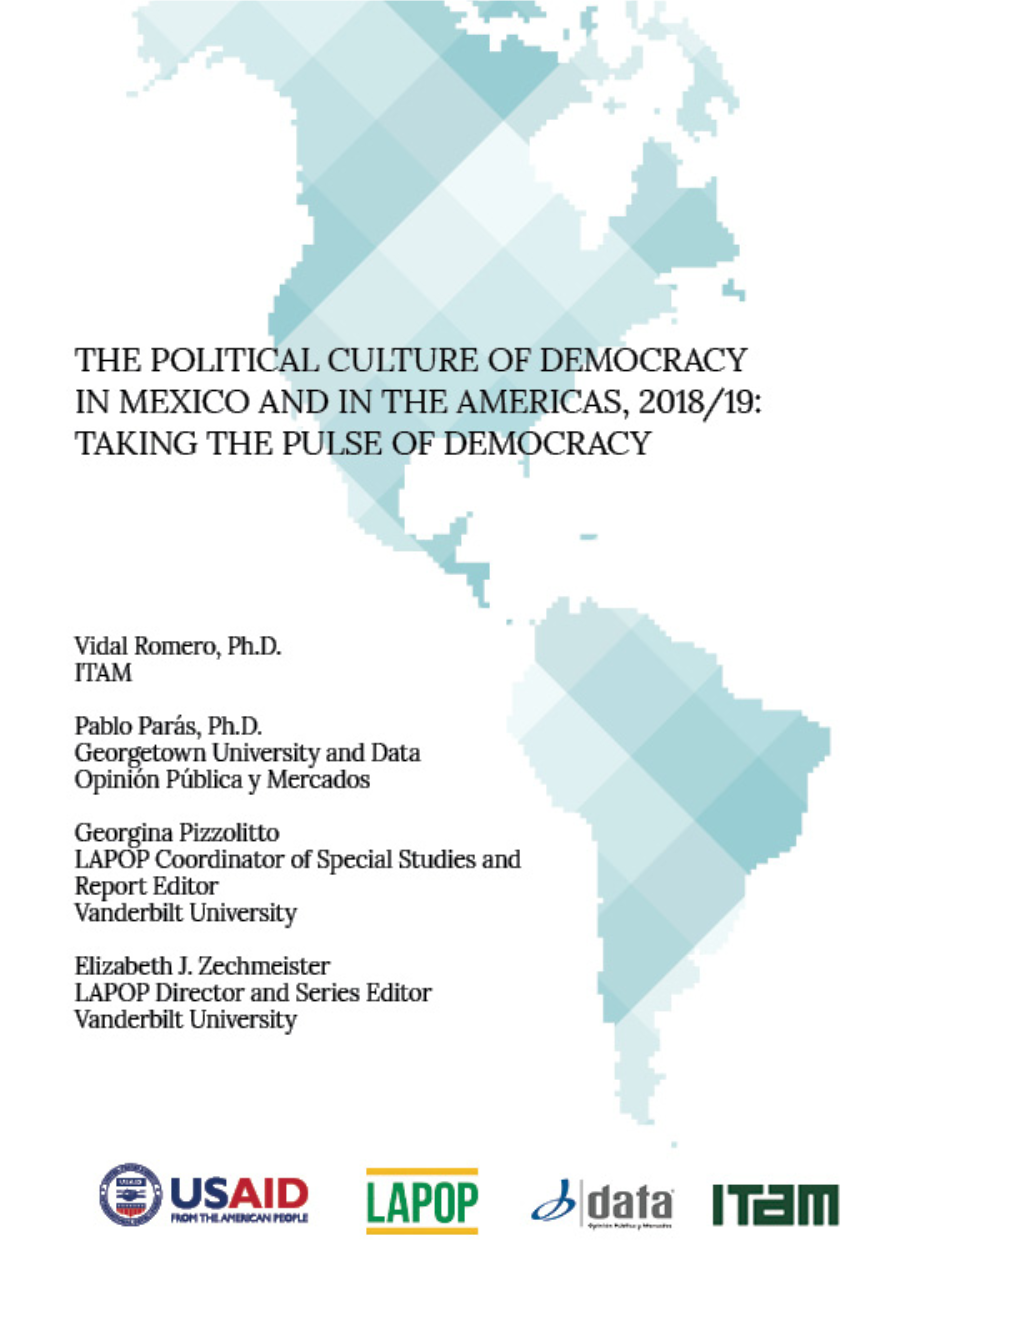 The Political Culture of Democracy in Mexico and in the Americas, 2018/19: Taking the Pulse of Democracy